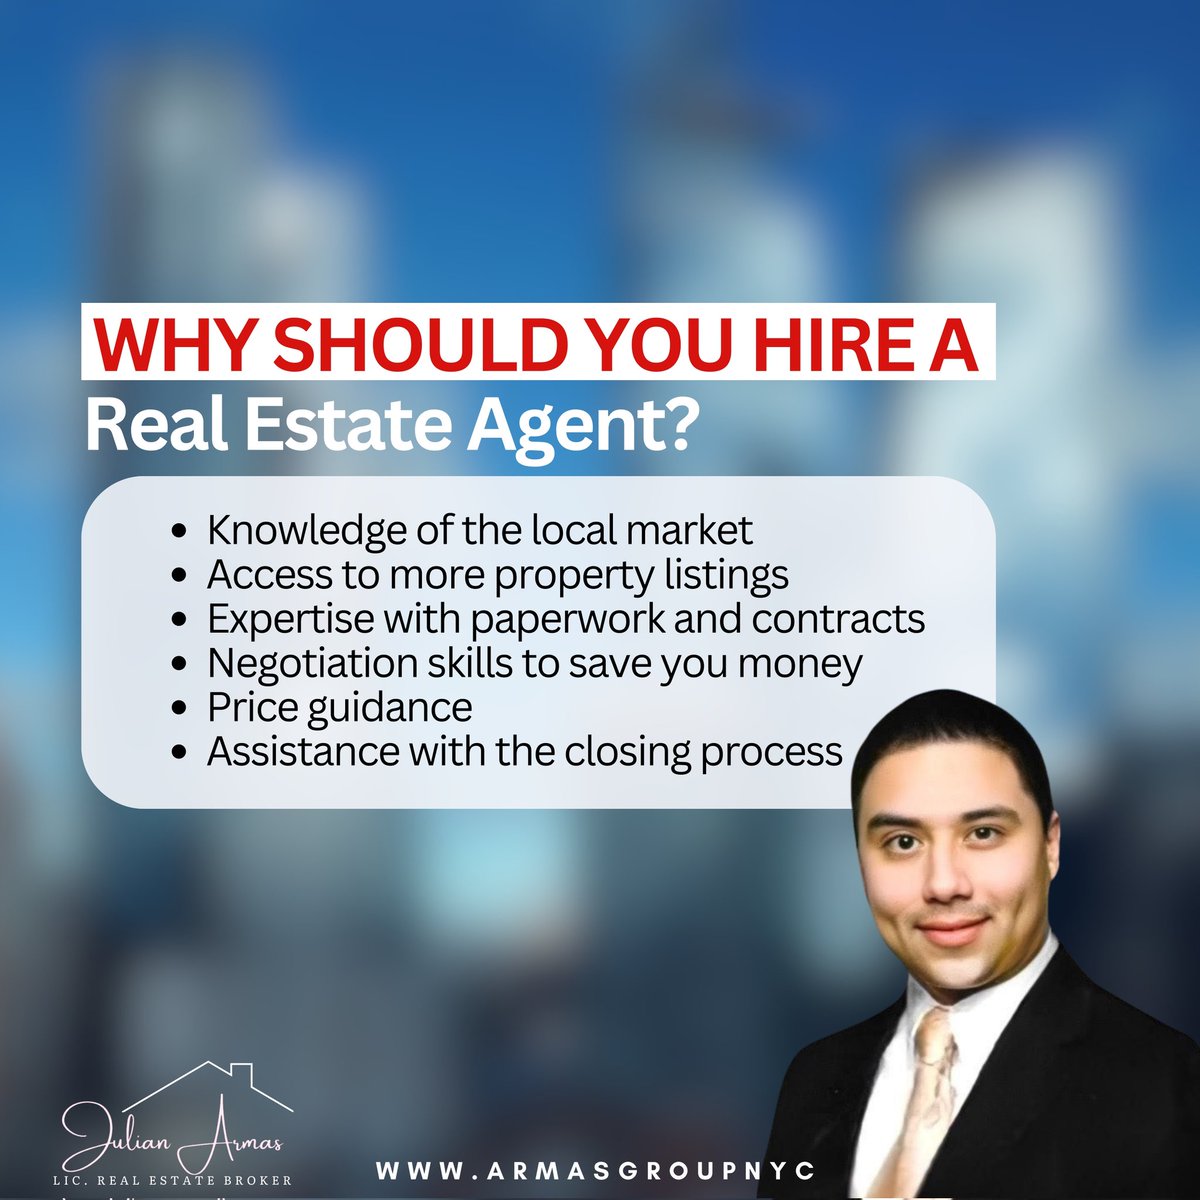 WHY SHOULD YOU HIRE A REAL ESTATE AGENT ? 
HOPE POINTS MENTIONED BELOW WILL HELP YOU IN KNOWING ....☑️

Follow @mrjulianarmas for more such information ℹ️ 

#homeowner  #listingspecialist #realestate #realestateagent #estateagentsofinstagram #realestatelife #realestategoals🏡💕